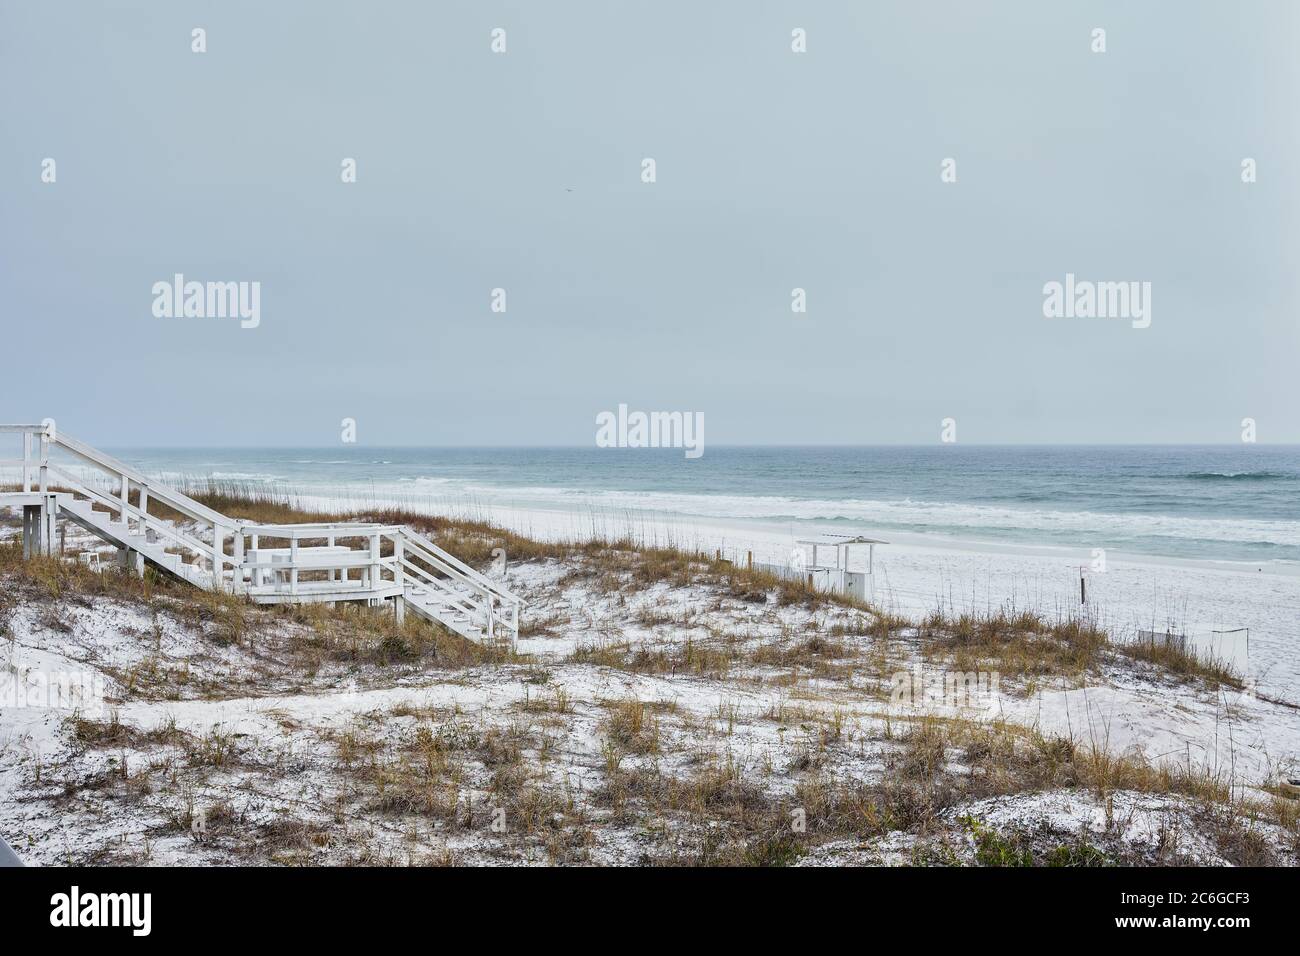 White on White.  Wooden stairway over coastal dunes at Destin, Florida leads to bright white sandy beach and pale green waters of the Gulf of Mexico. Stock Photo